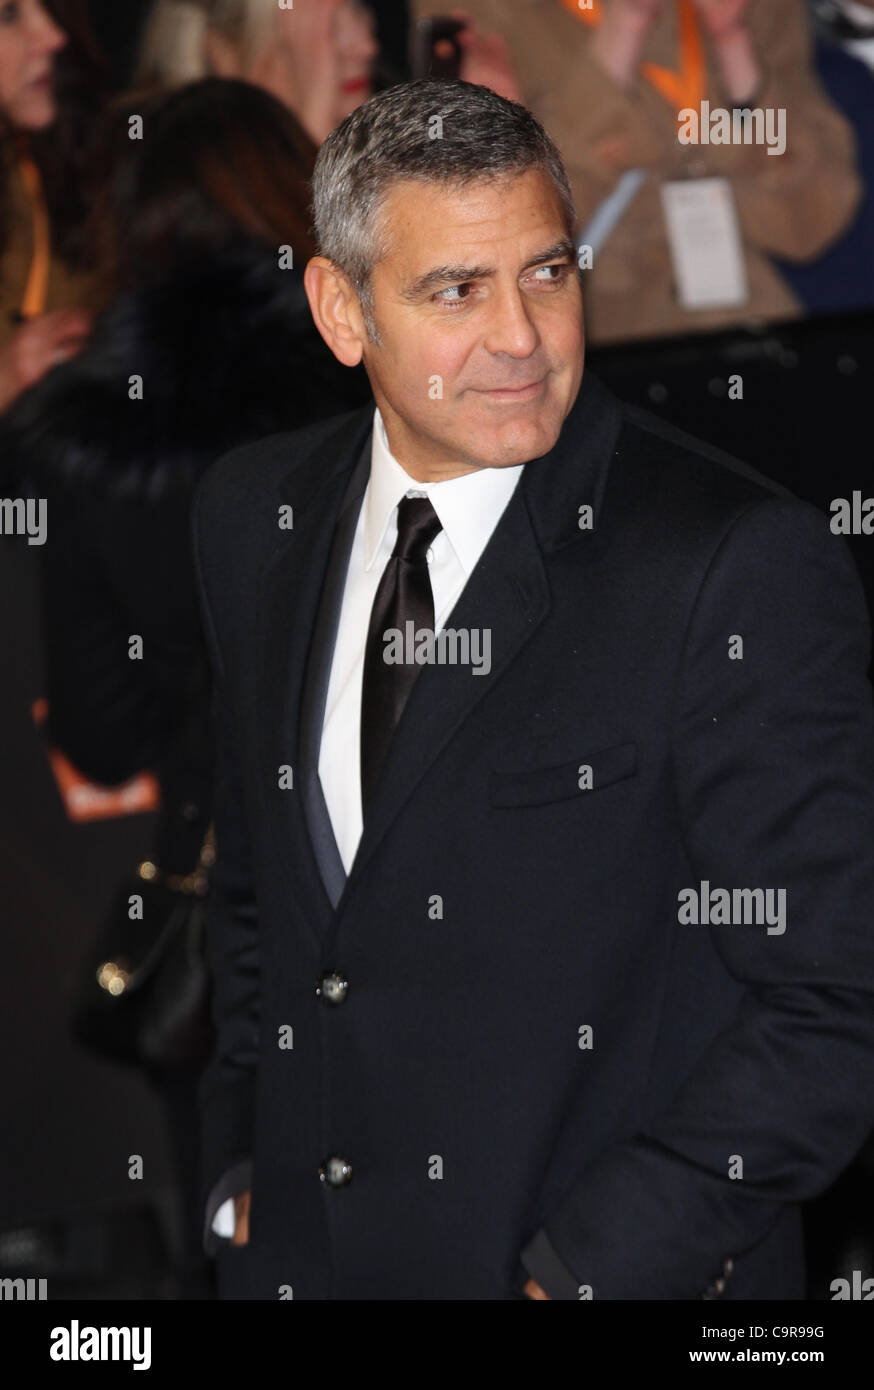 London, UK, 12/02/2012 George Clooney arrives for the Orange British Academy Film Awards (BAFTAS) Royal Opera House, Covent Garden, in London Stock Photo